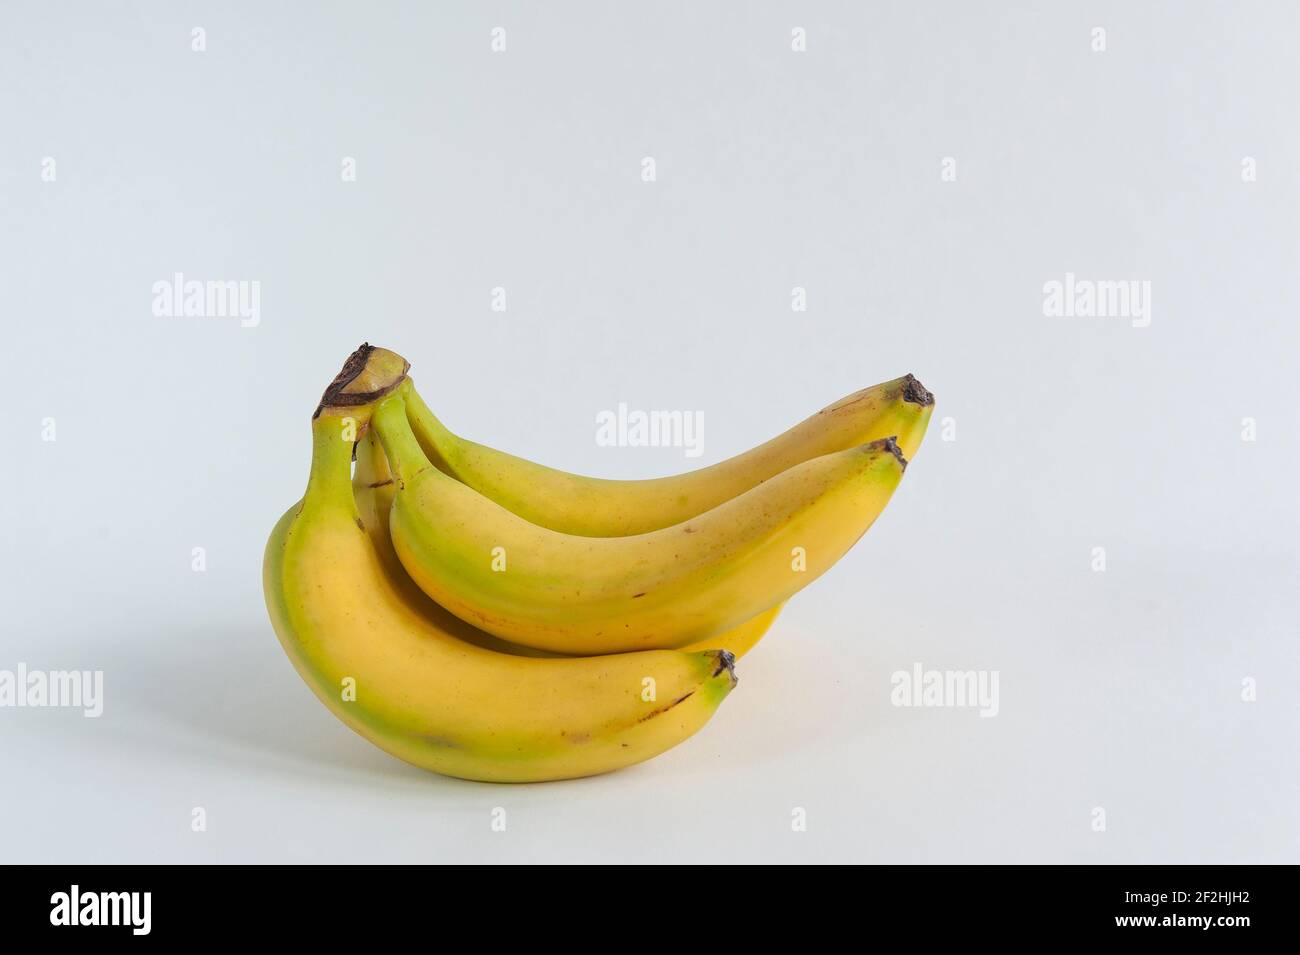 https://c8.alamy.com/comp/2F2HJH2/a-bunch-of-bananas-on-a-white-background-2F2HJH2.jpg